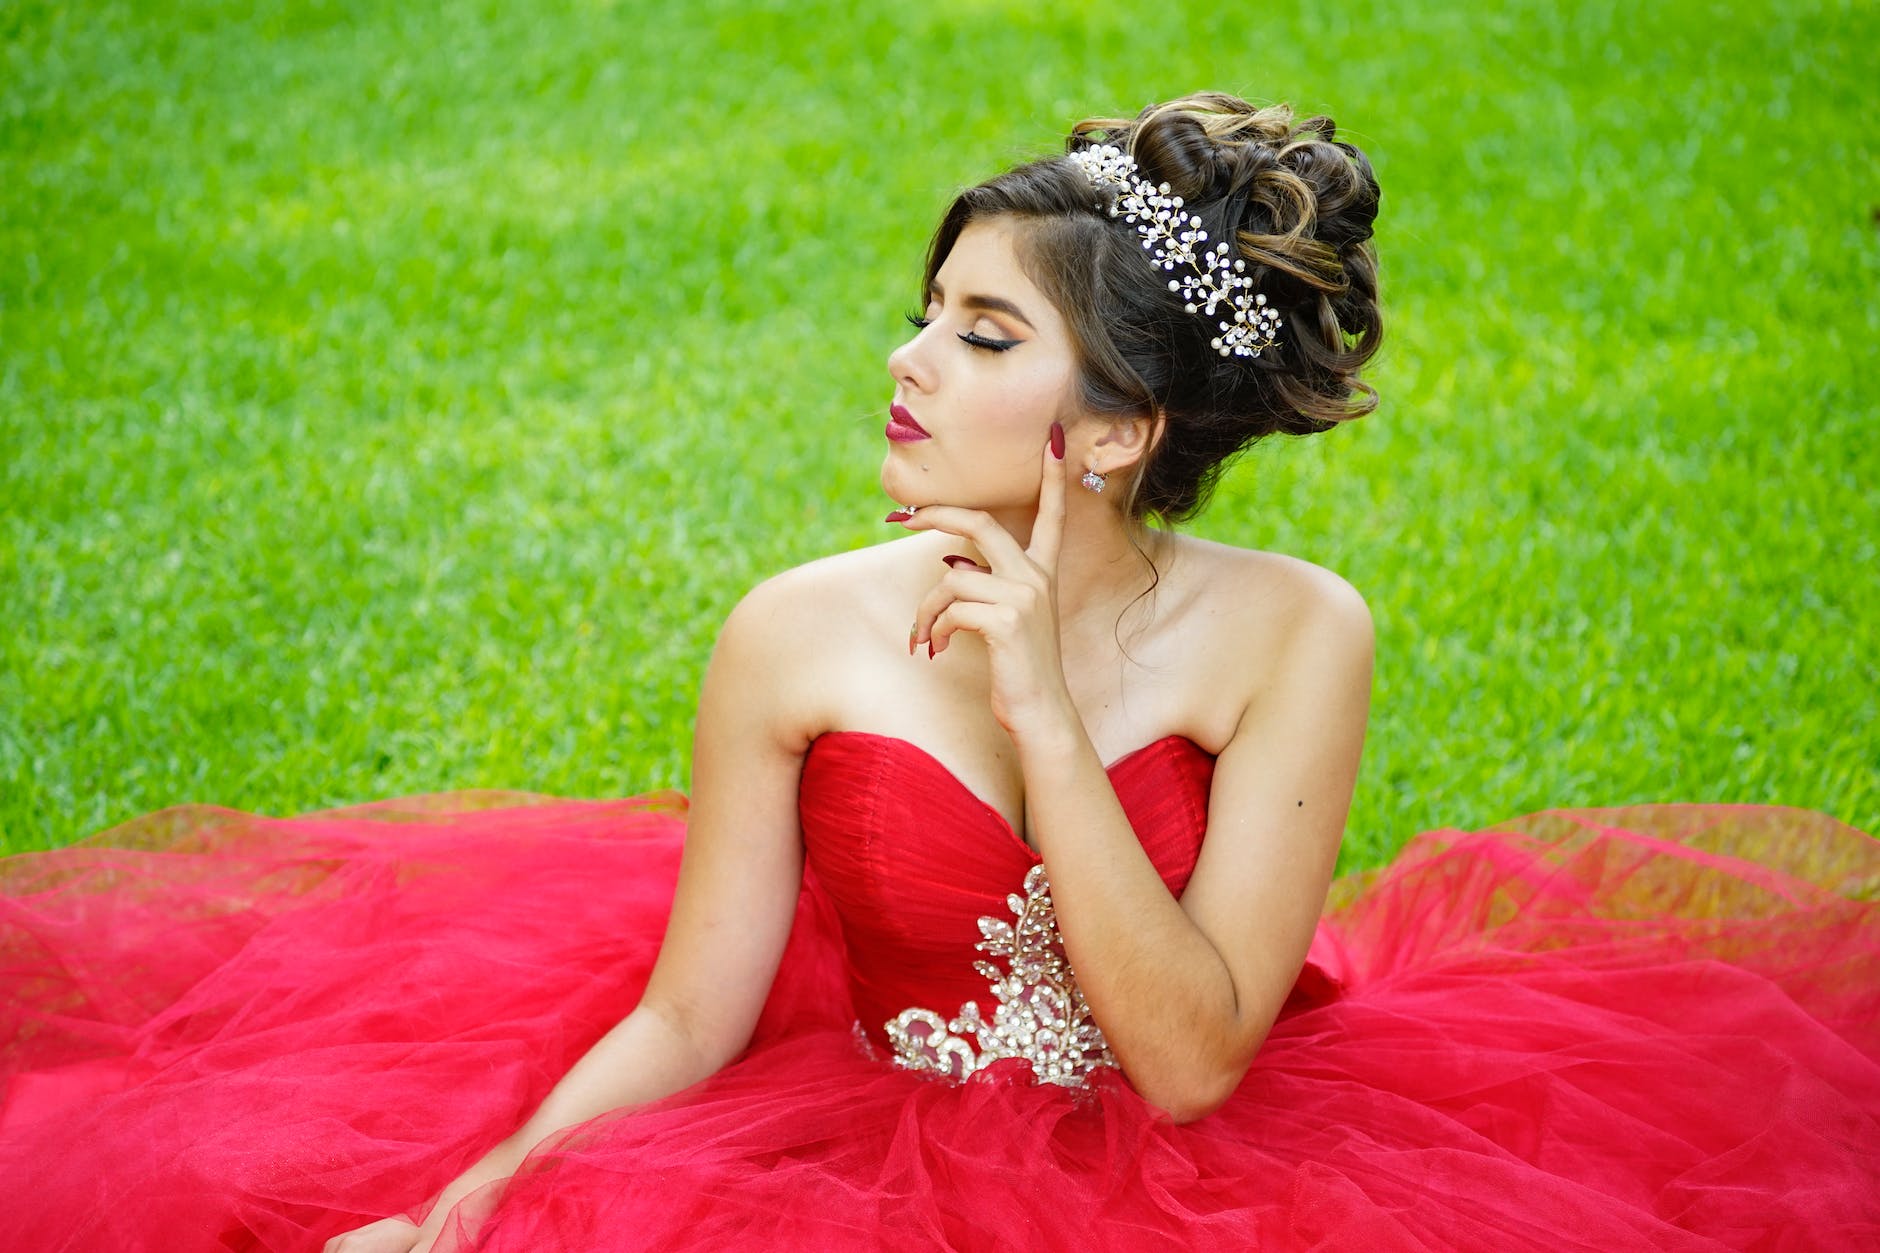 a pretty woman in red prom dress posing - Choose a Reputable Shop to Make Prom Dress Shopping Easier